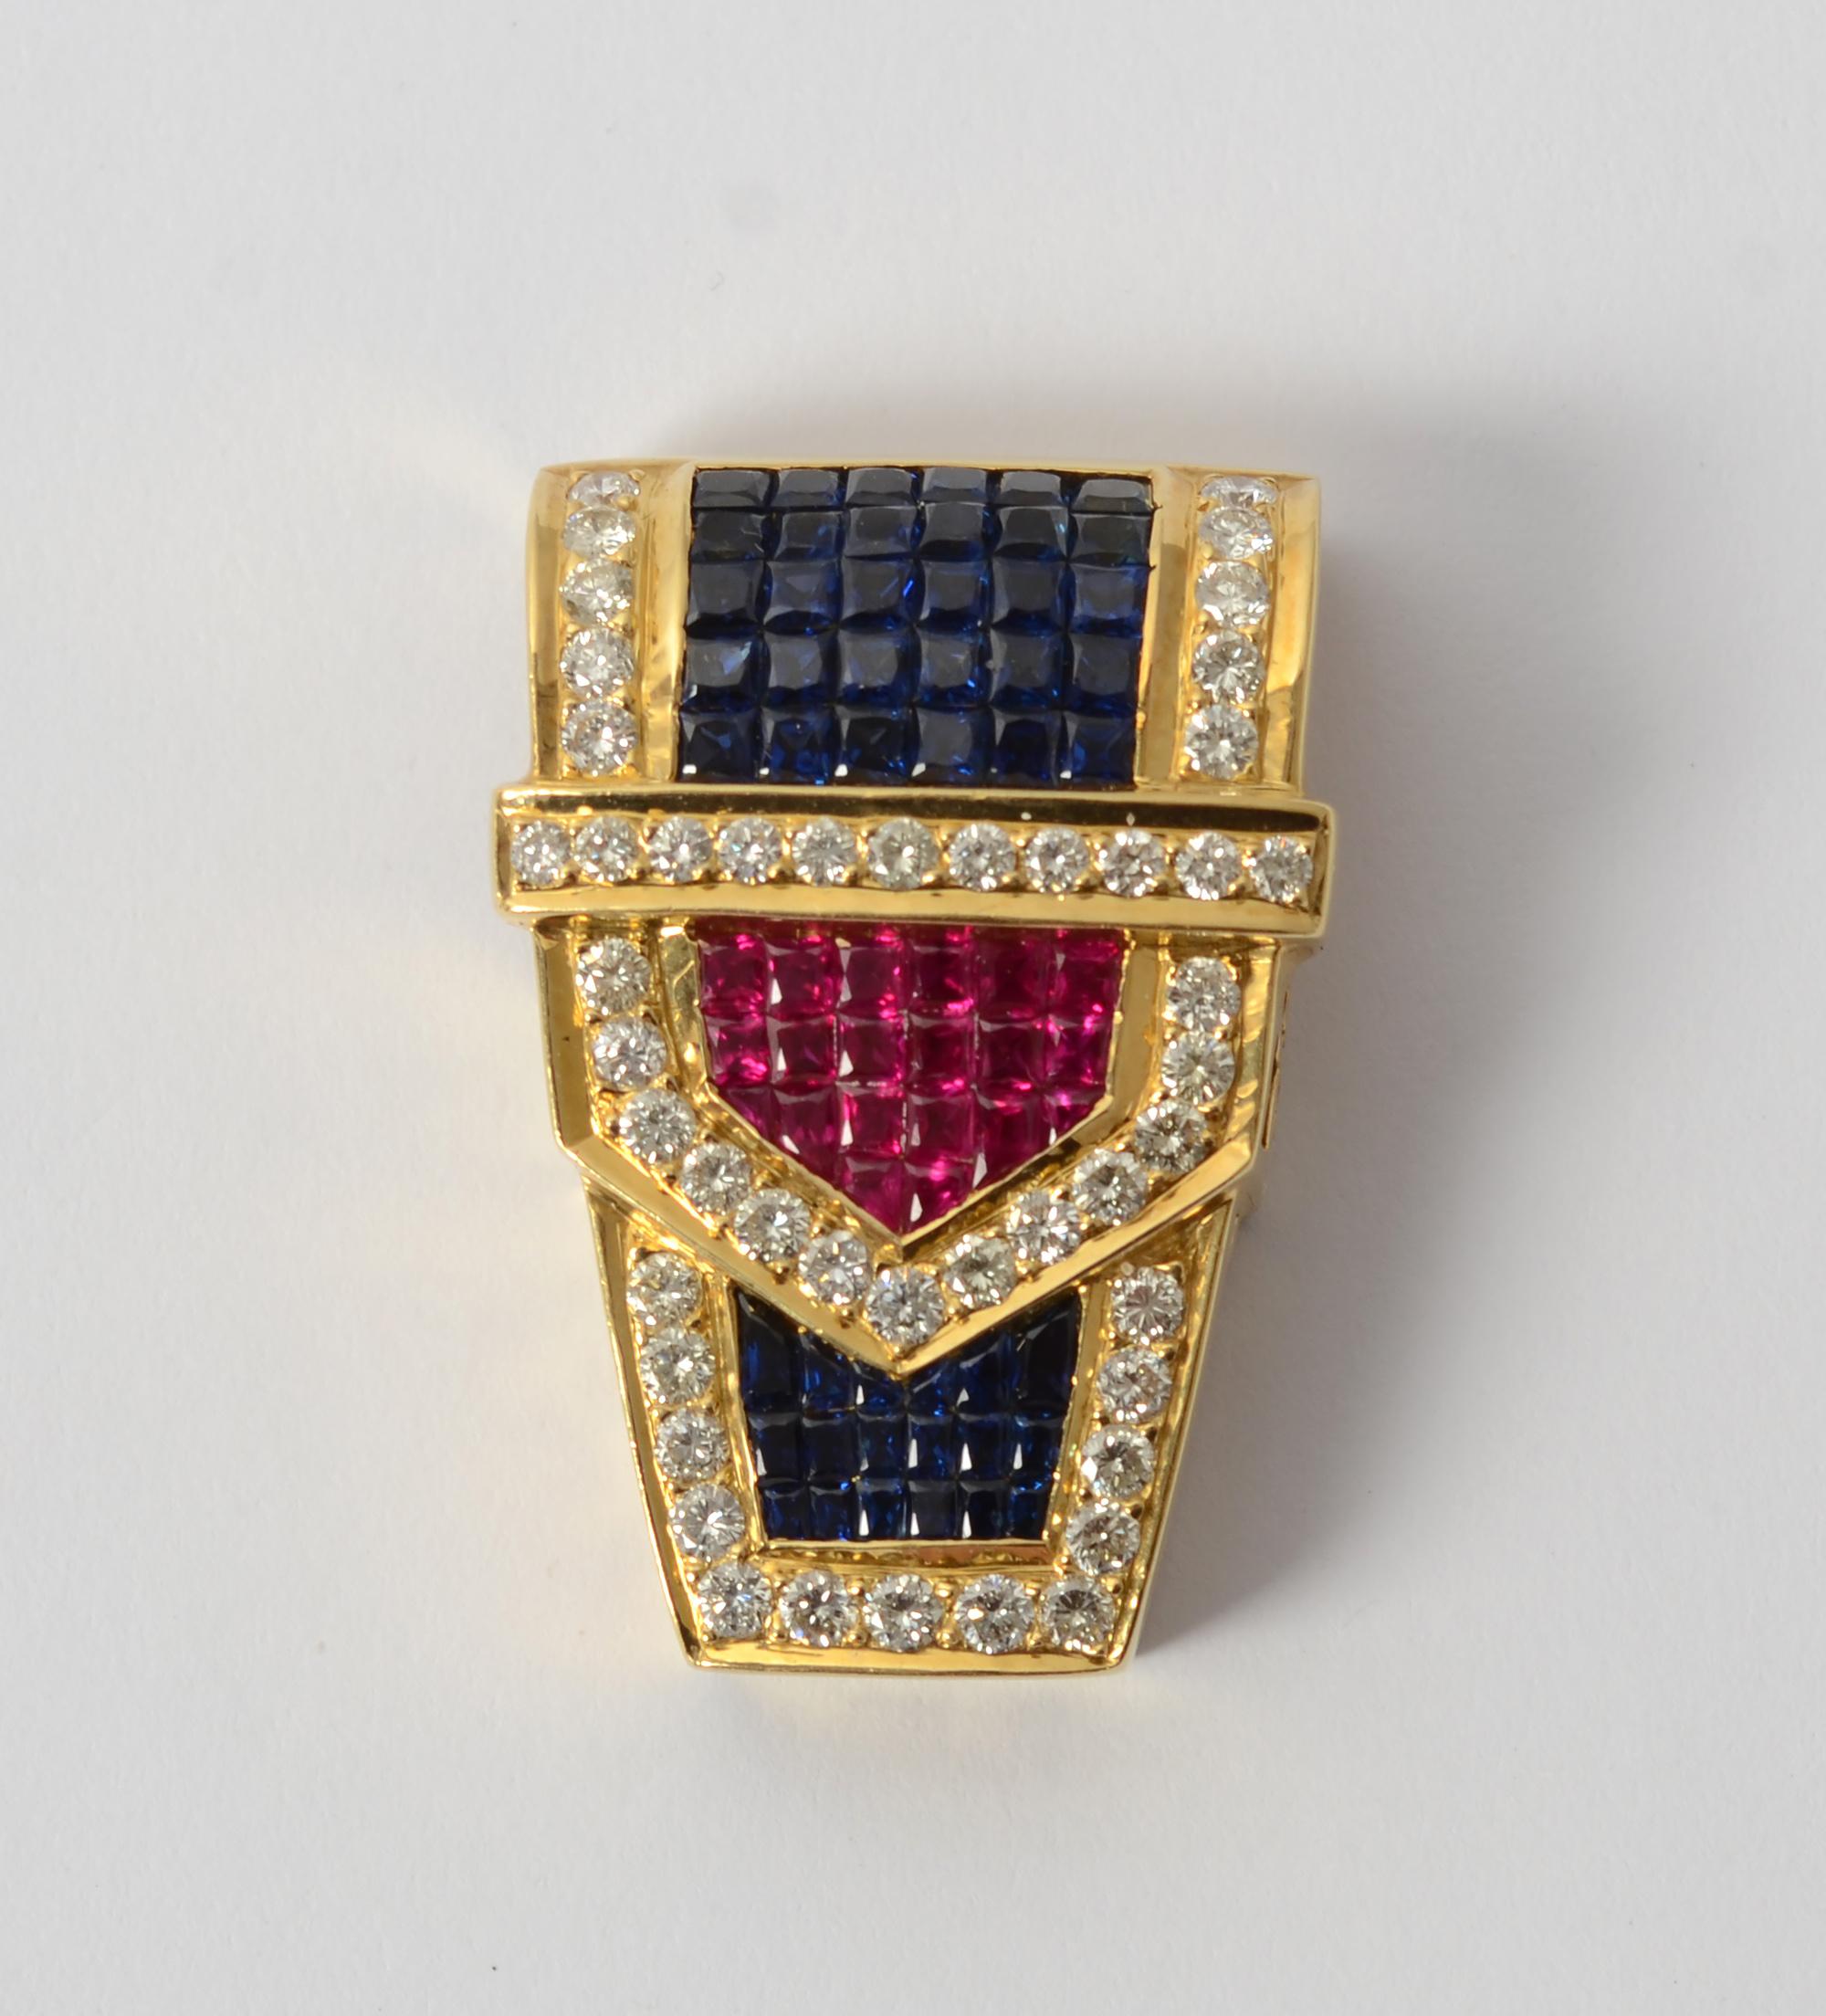 Exquisitely designed and made 18 karat gold pendant with invisibly set rubies and sapphires framed by diamonds. The pendant is in a buckle design measuring 1 1/4 inches in length and 7/8 inch at the widest.
Both the sides and backing have fine